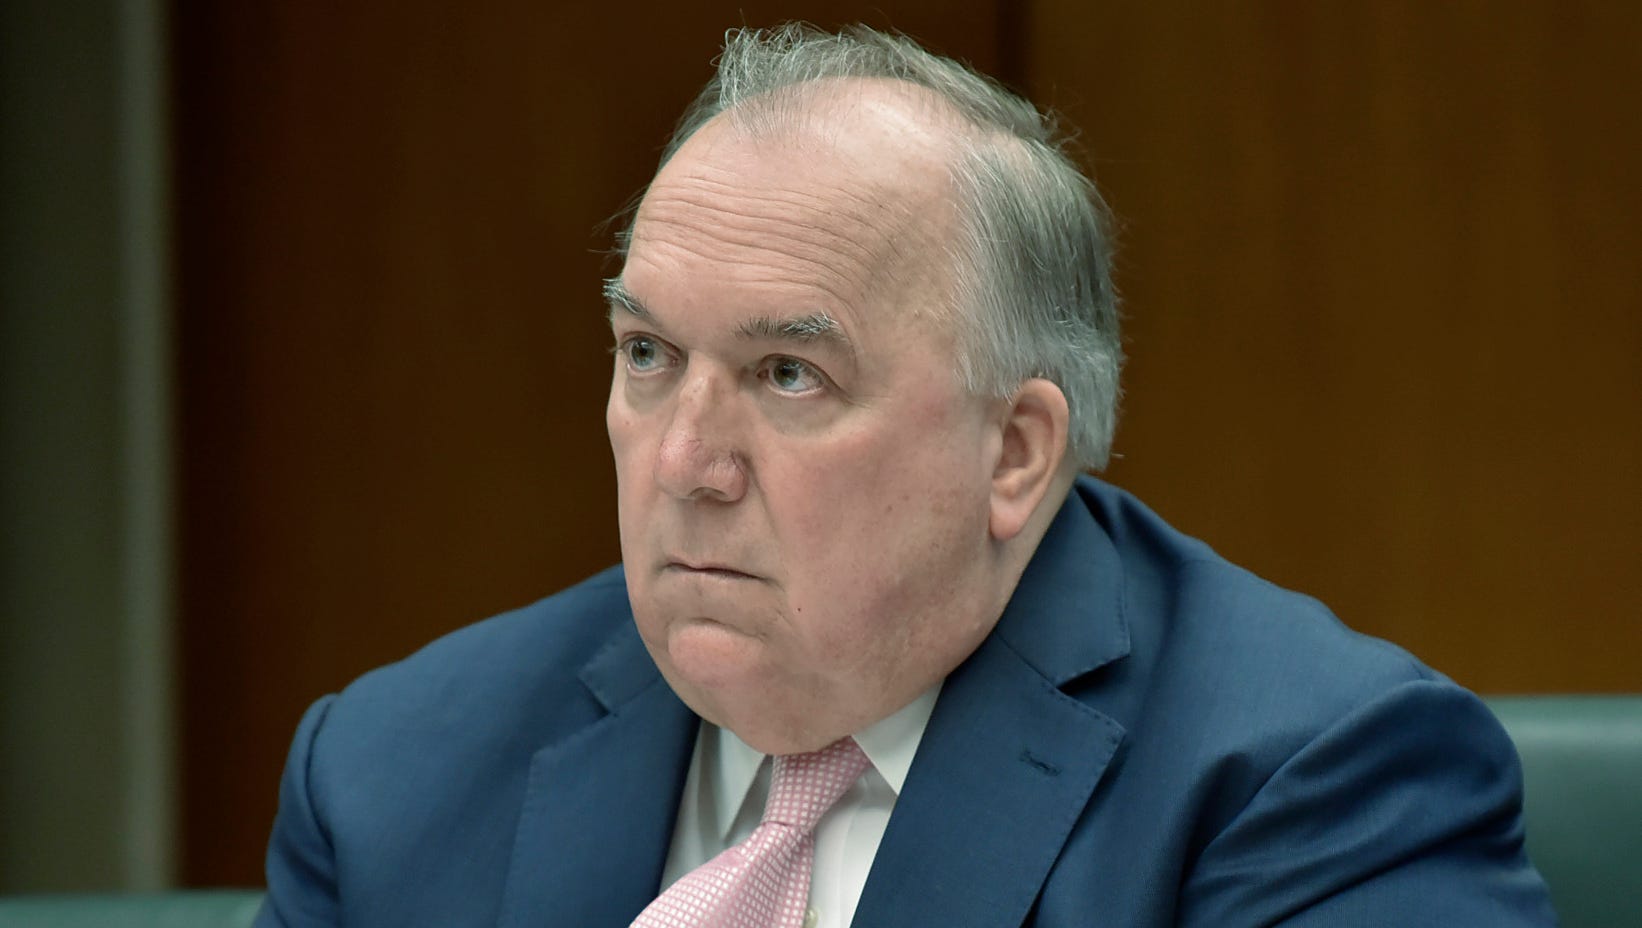 MSU Interim President John Engler listens to public statements, some of them calling for his ouster, during an Action Meeting of the Michigan State University Board of Trustees in the Hannah Administration Building, Friday morning, June 22, 2018.